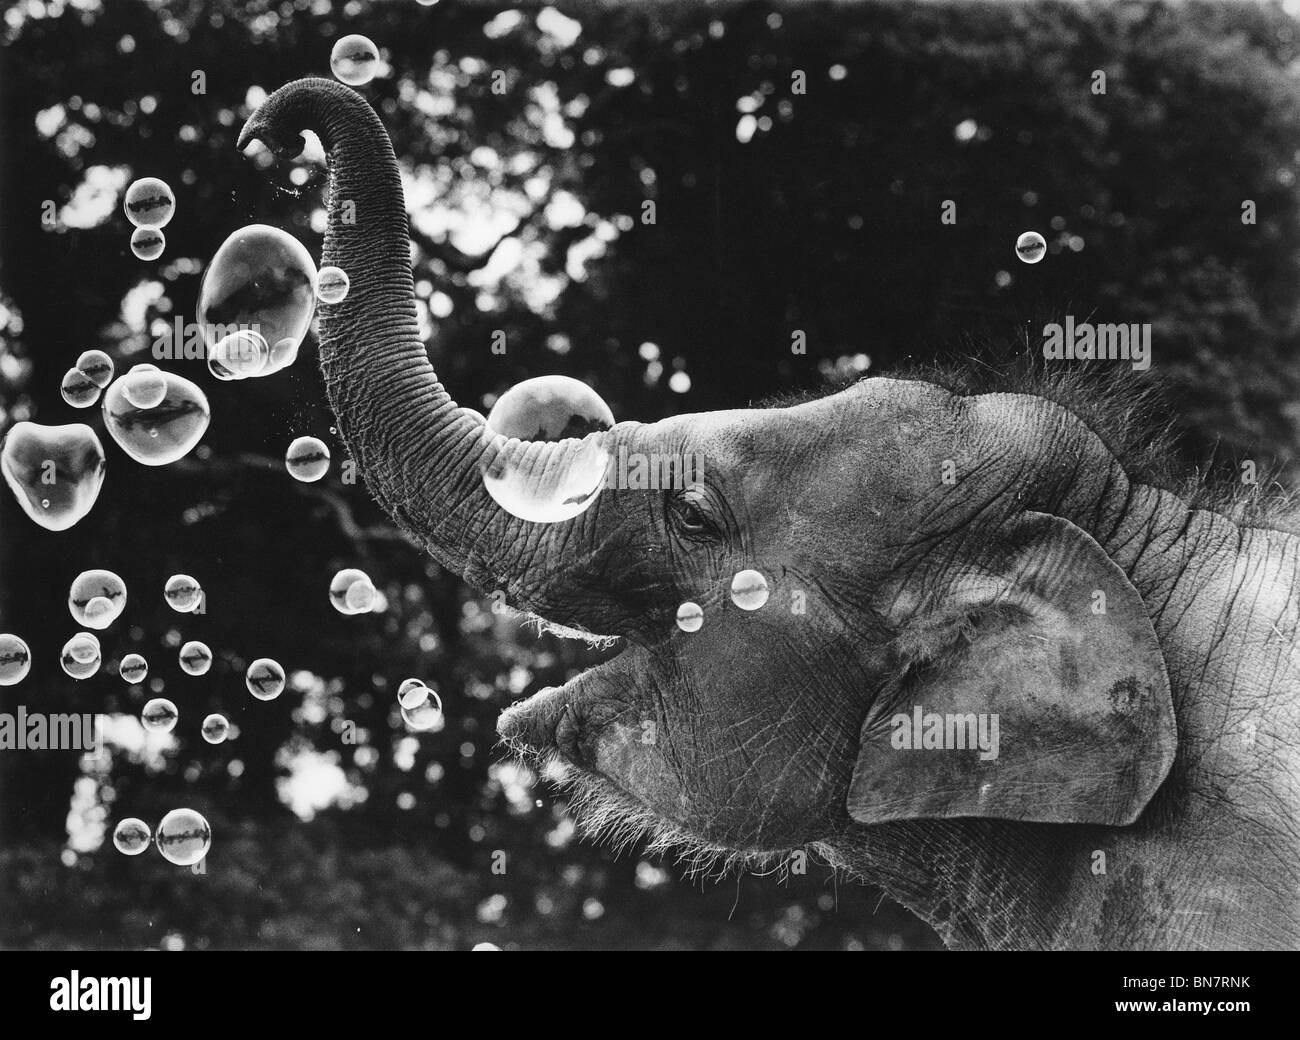 A baby elephant blowing bubbles. Stock Photo